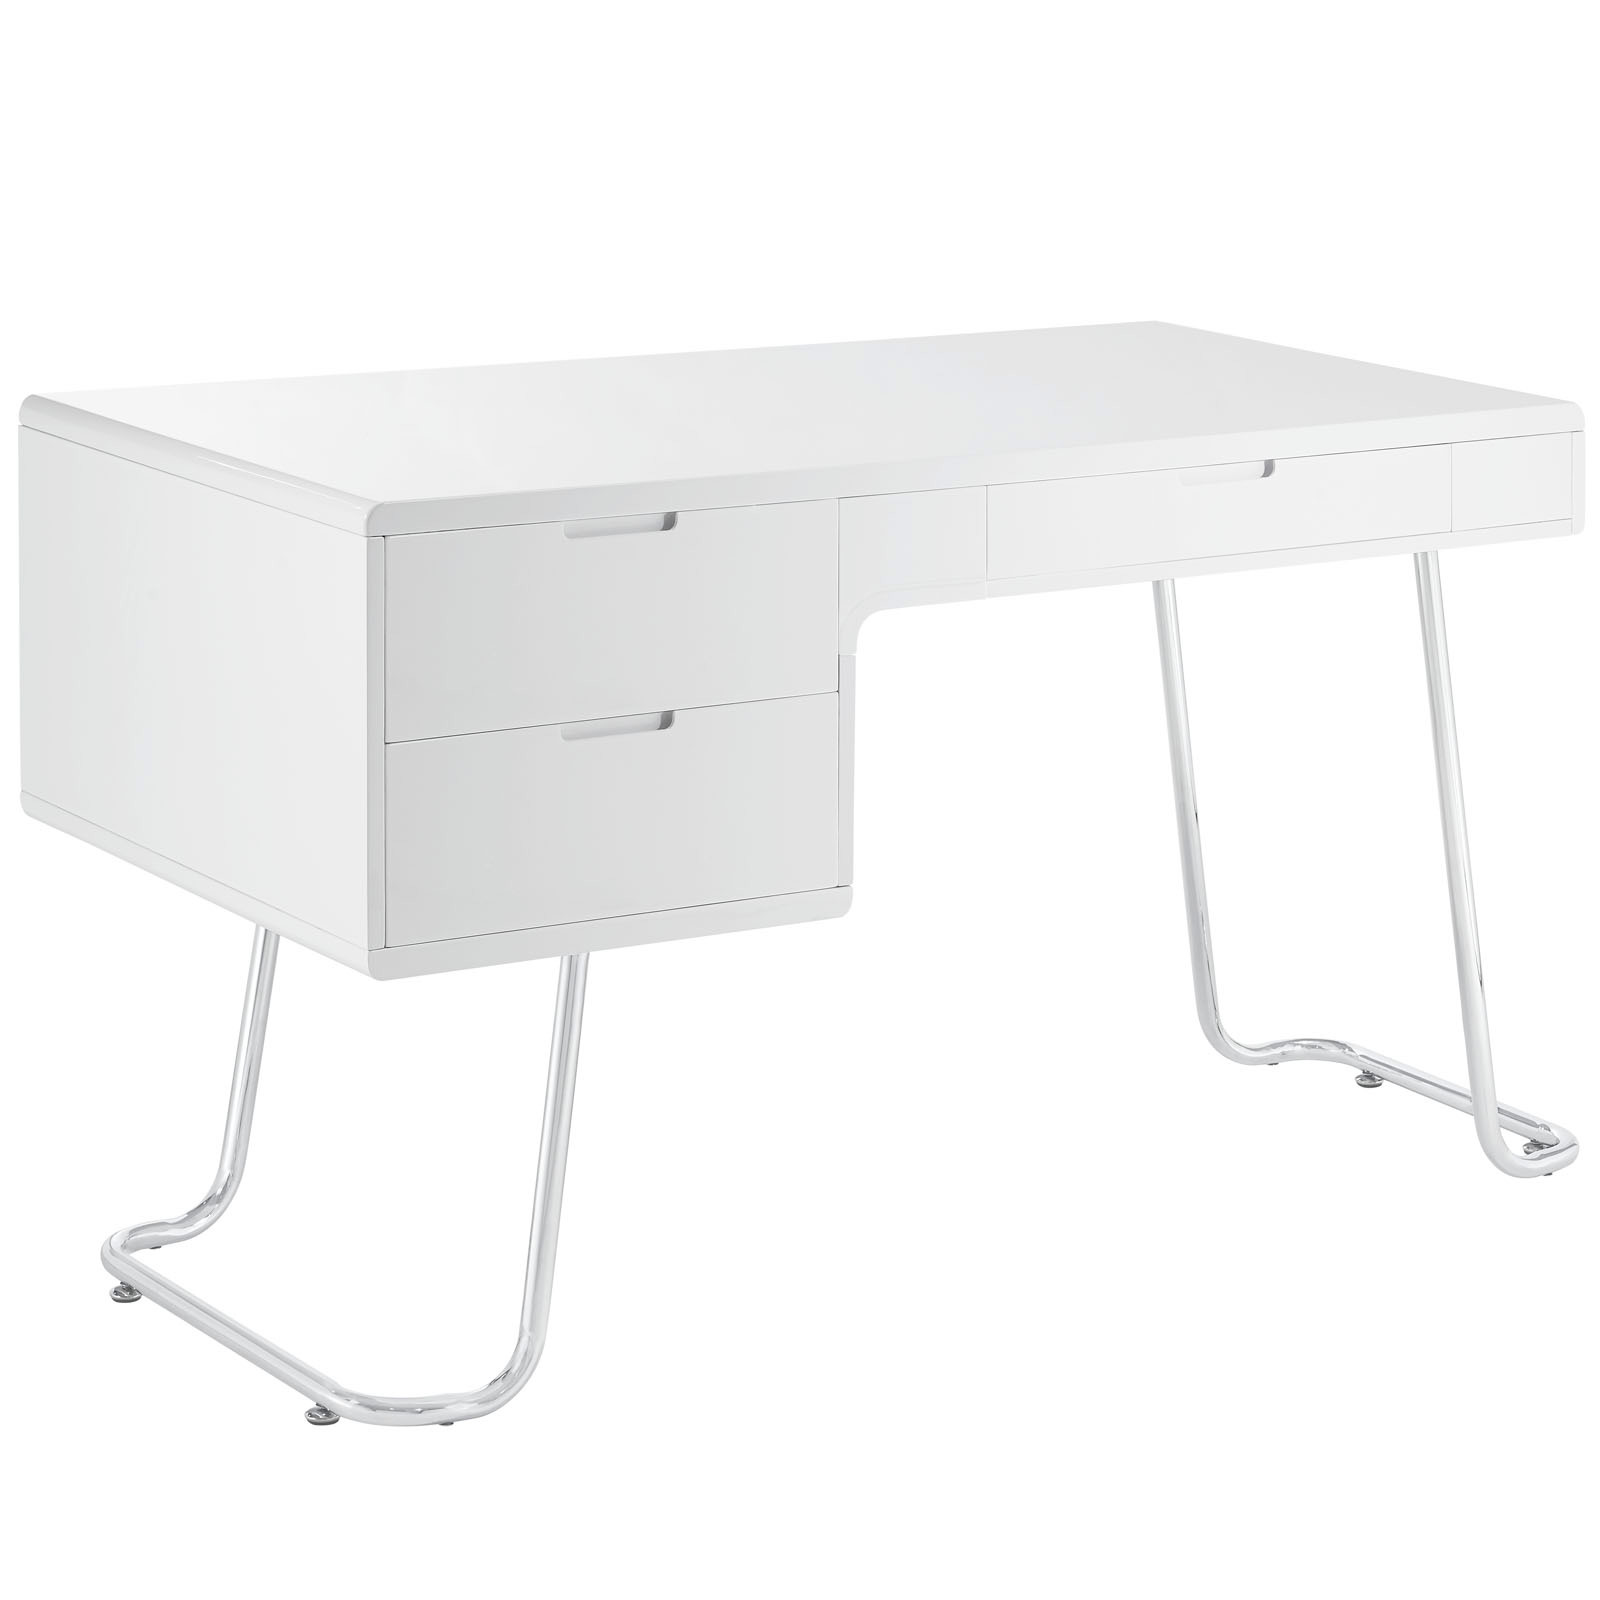 White Office Desk - Lucas's Way Computer Desk For Small Spaces